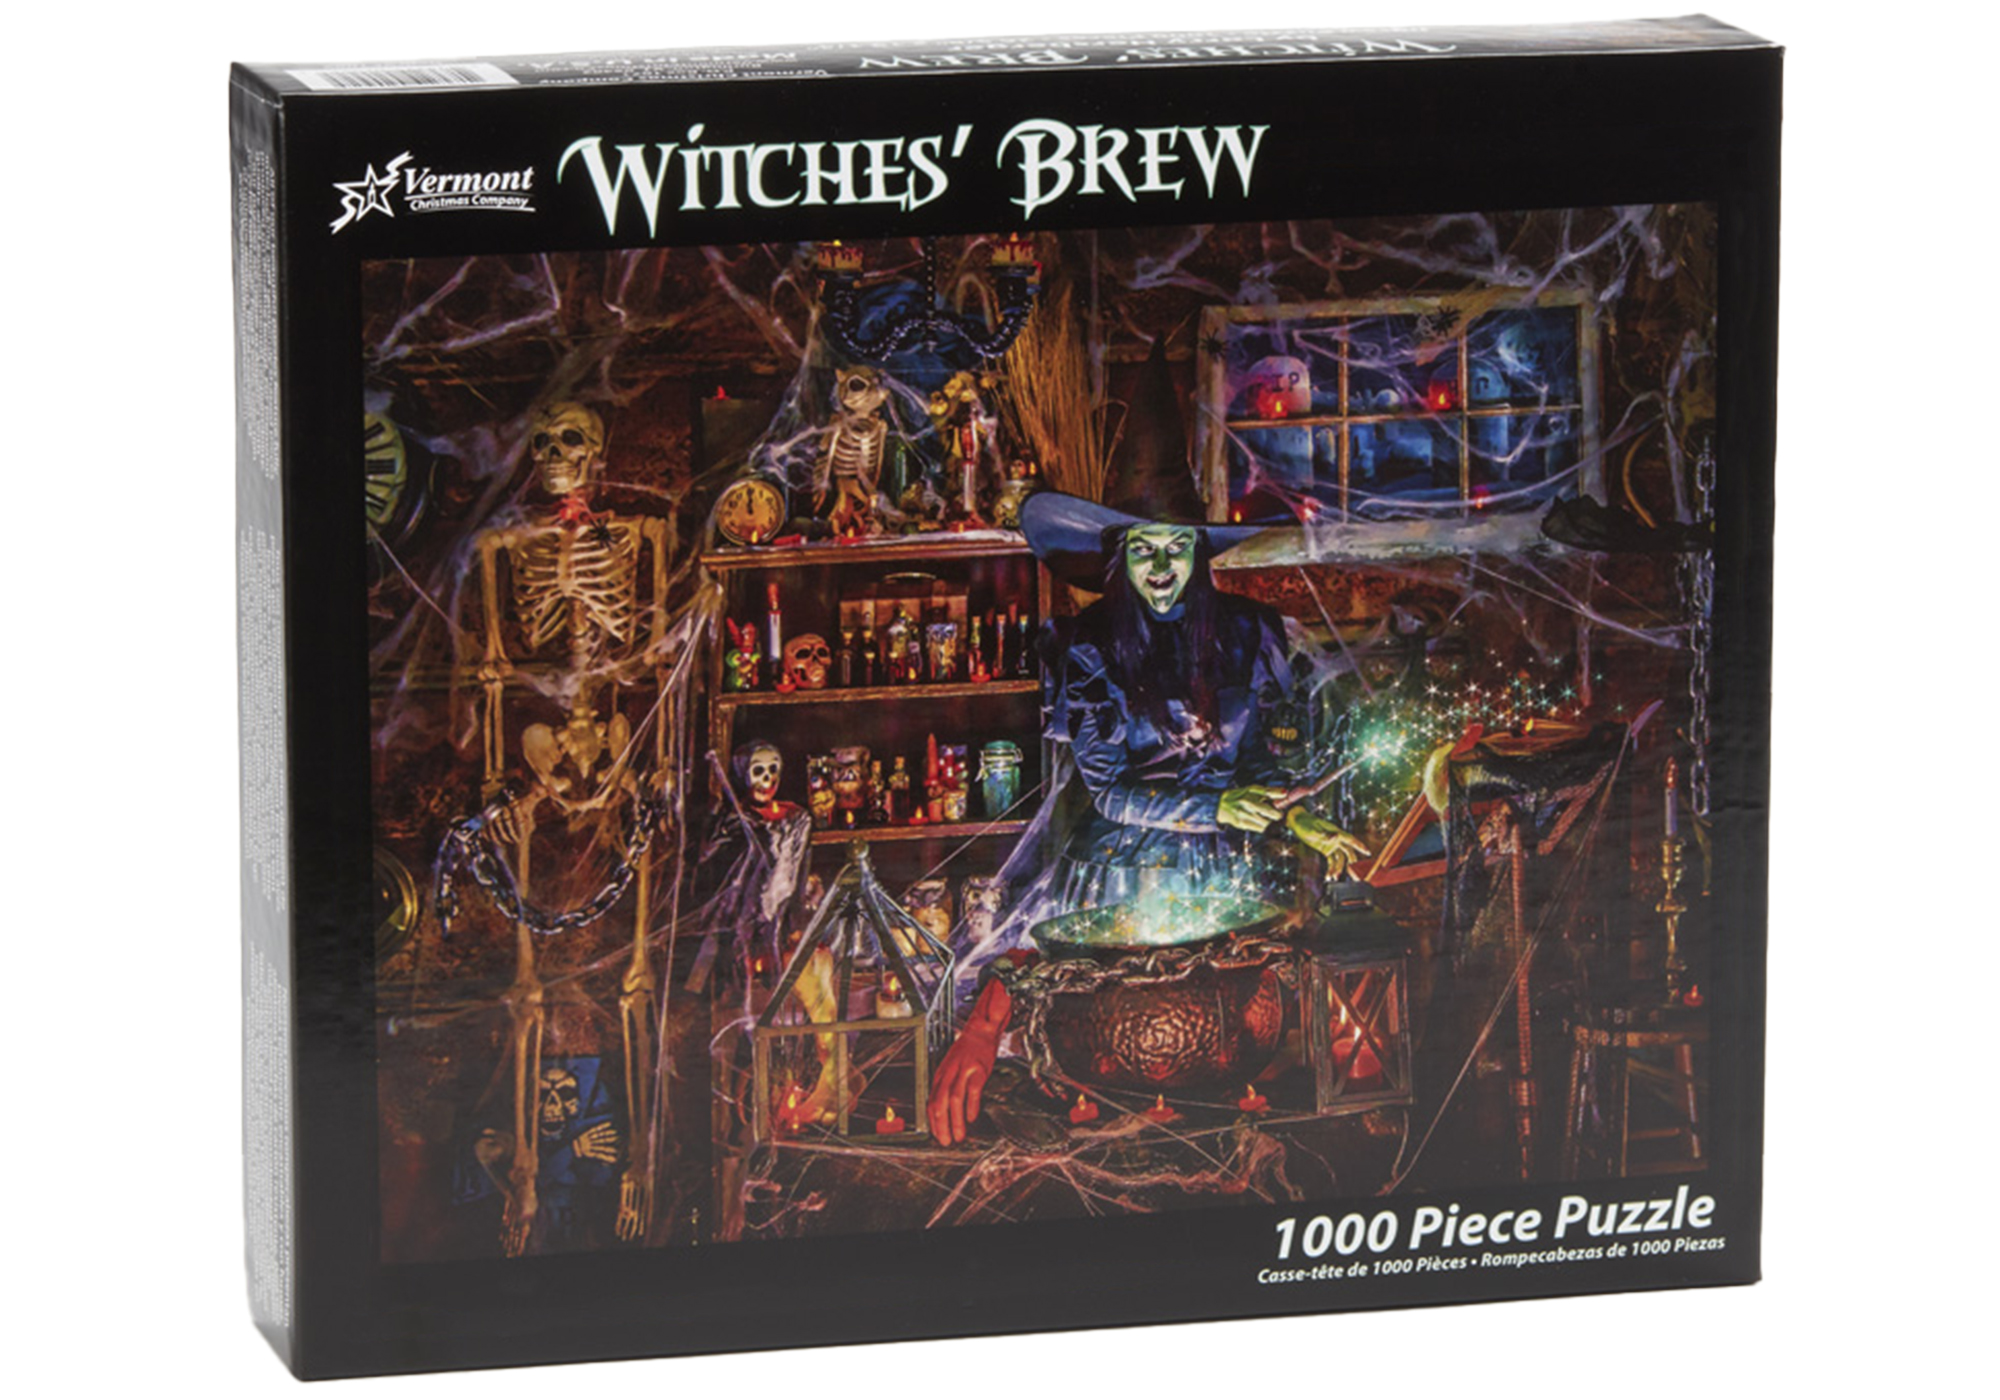 Vermont Christmas Company Witches' Brew Jigsaw Puzzle - 1000 Piece Halloween Puzzles for Adults with Randomly Shaped Pieces - Fully Interlocking Halloween Puzzles 1000 Pieces (26 5/8" x 19 1/4") - image 2 of 3